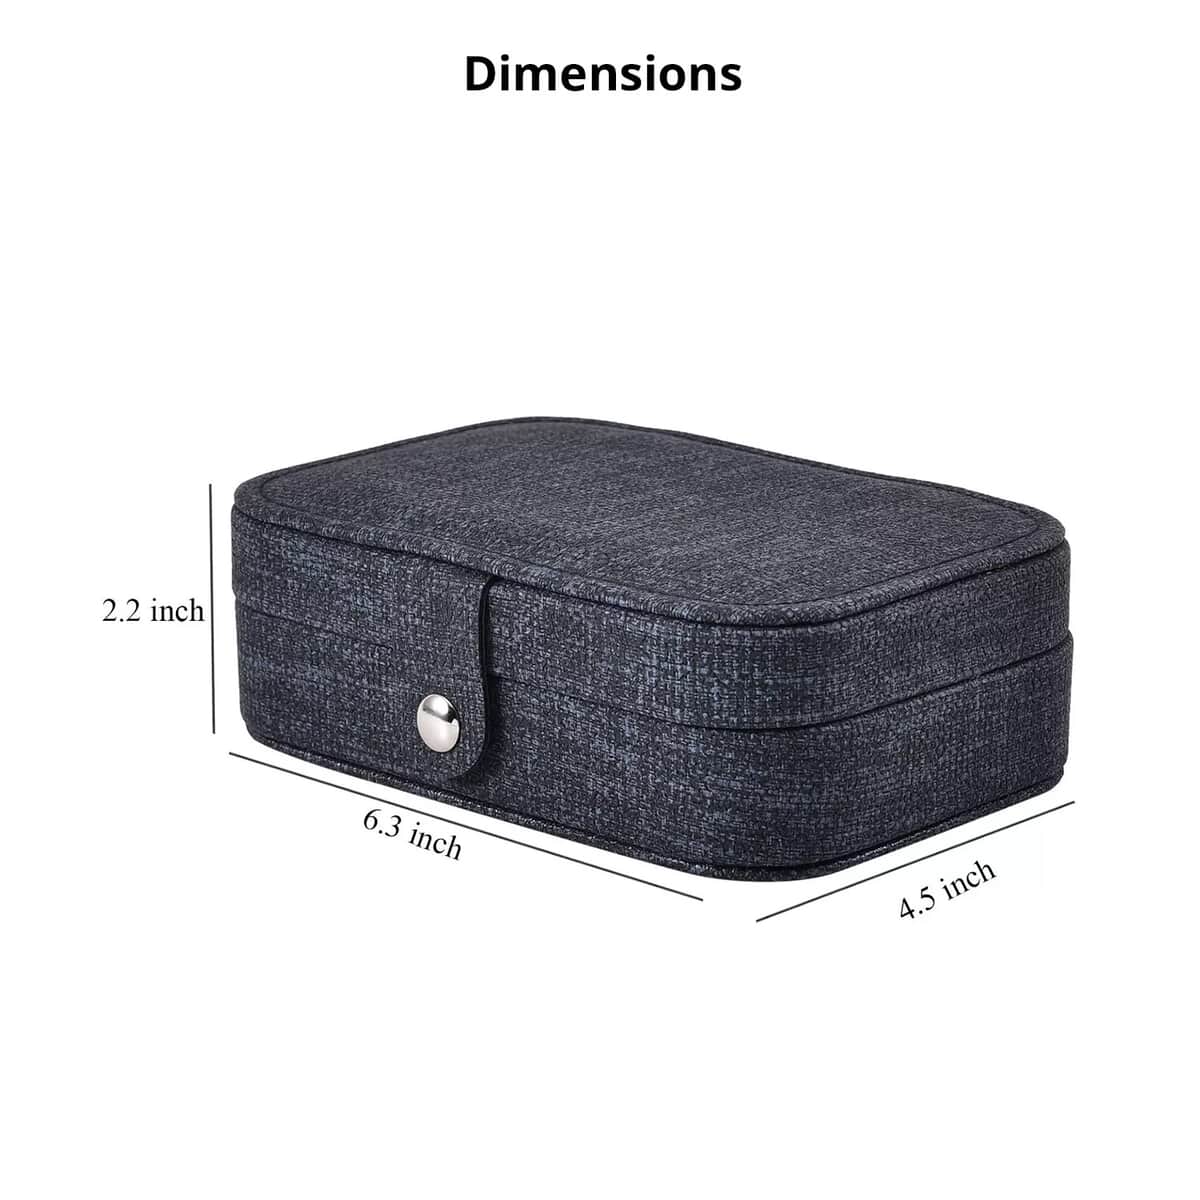 Dark Blue Woven Texture Faux Leather Jewelry Organizer with Button Closure (6.3"x4.5"x2.2") image number 3